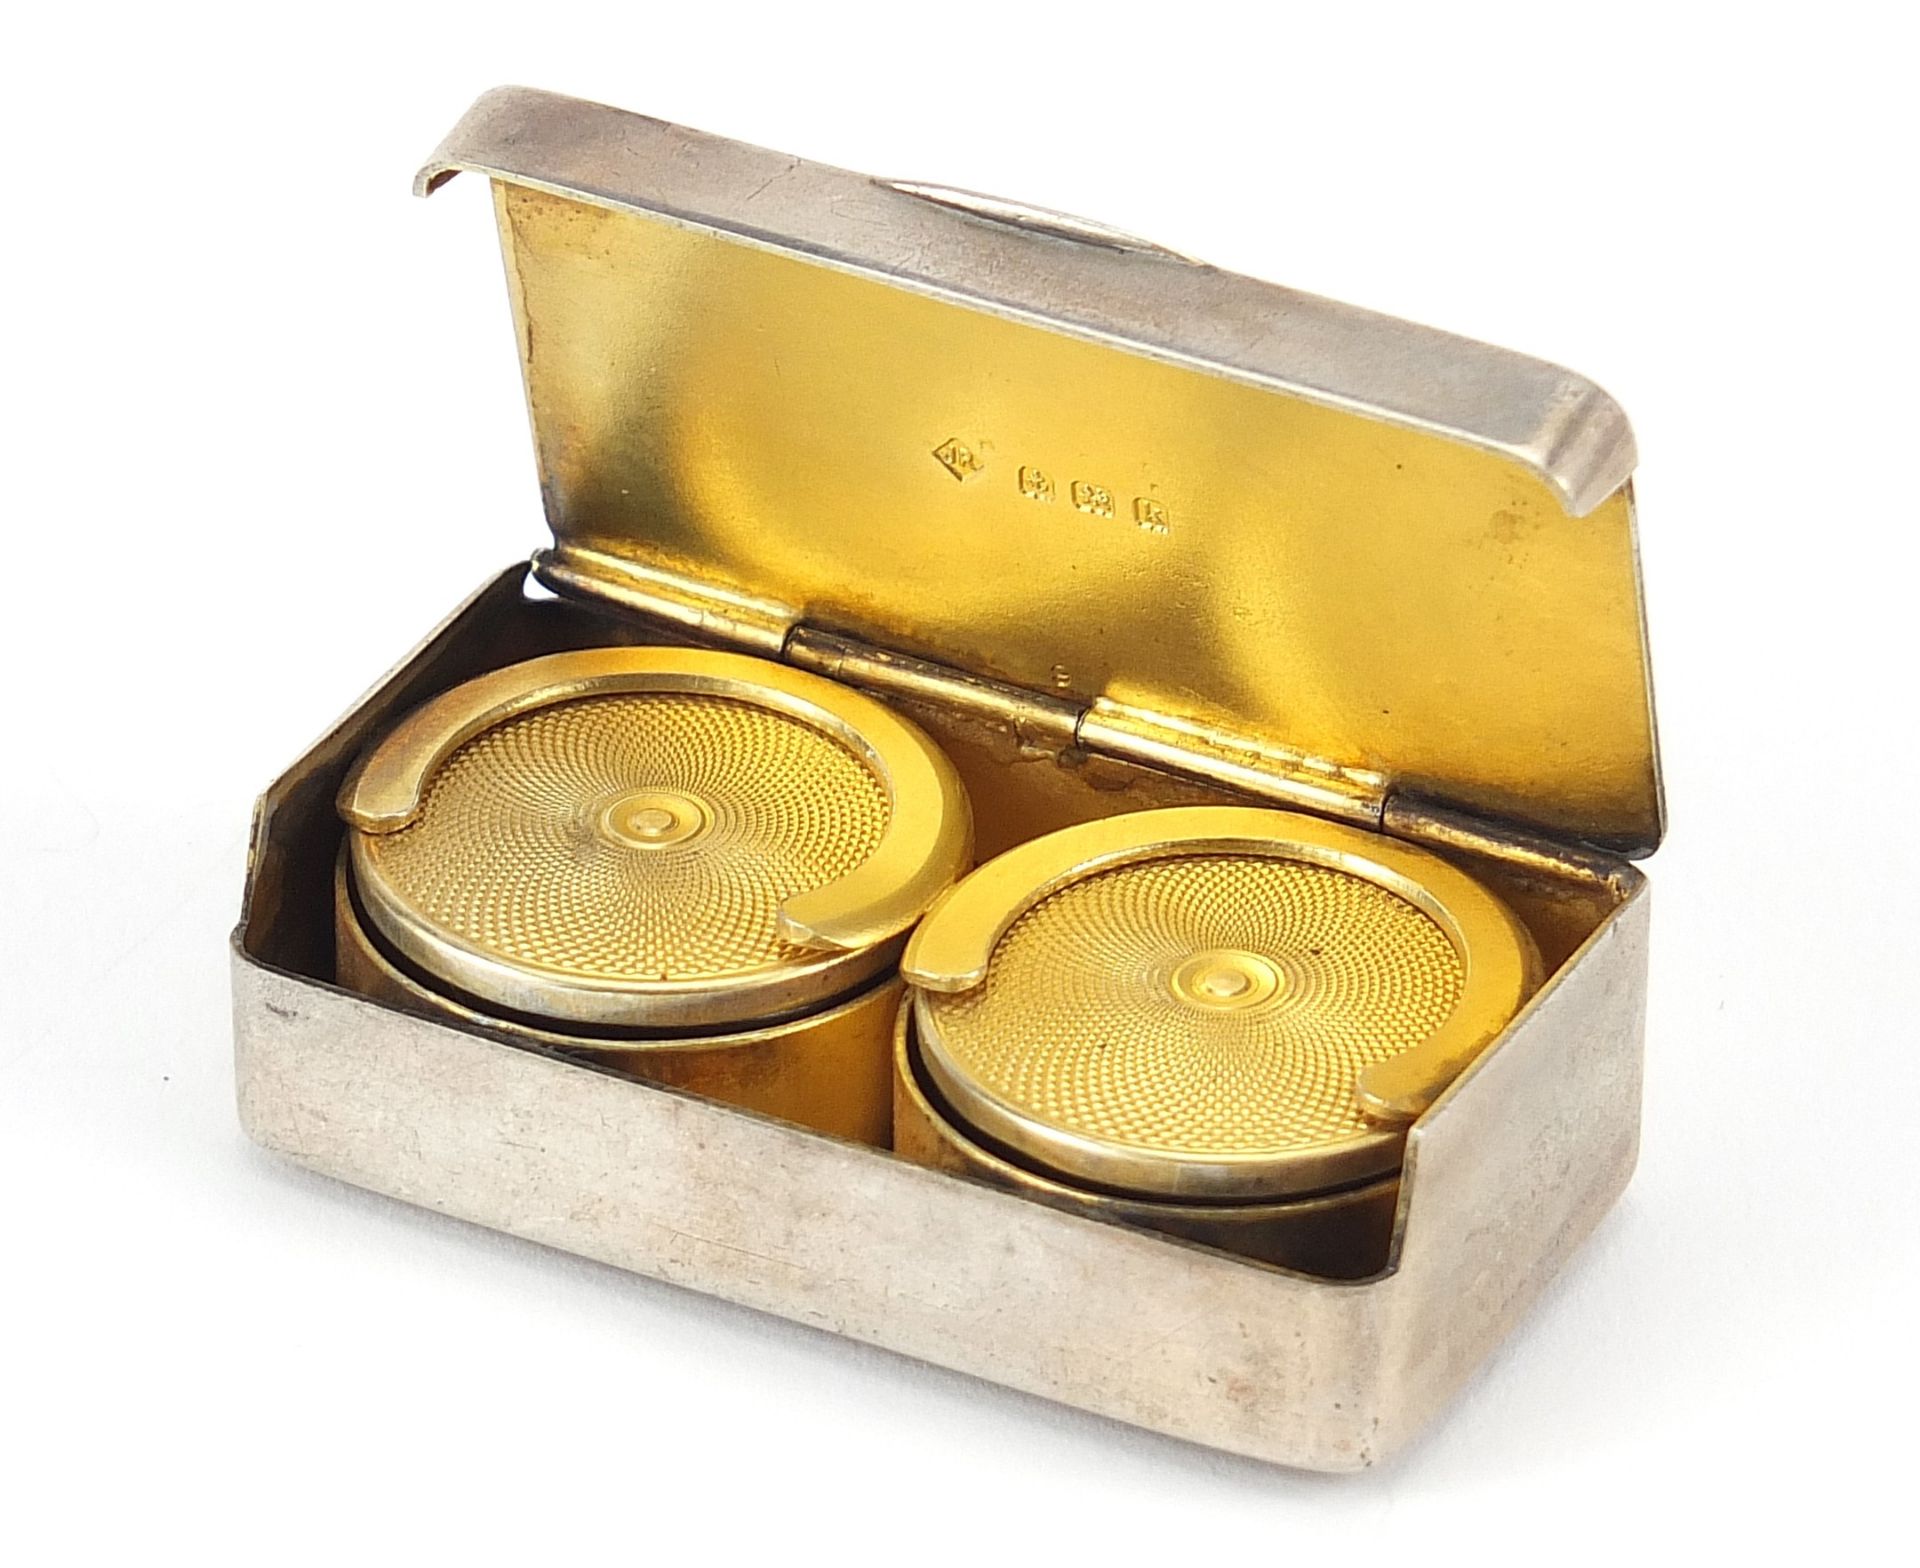 Rotherham & Sons, Edwardian silver double sovereign case with hinged lid and gilt interior, - Image 2 of 6